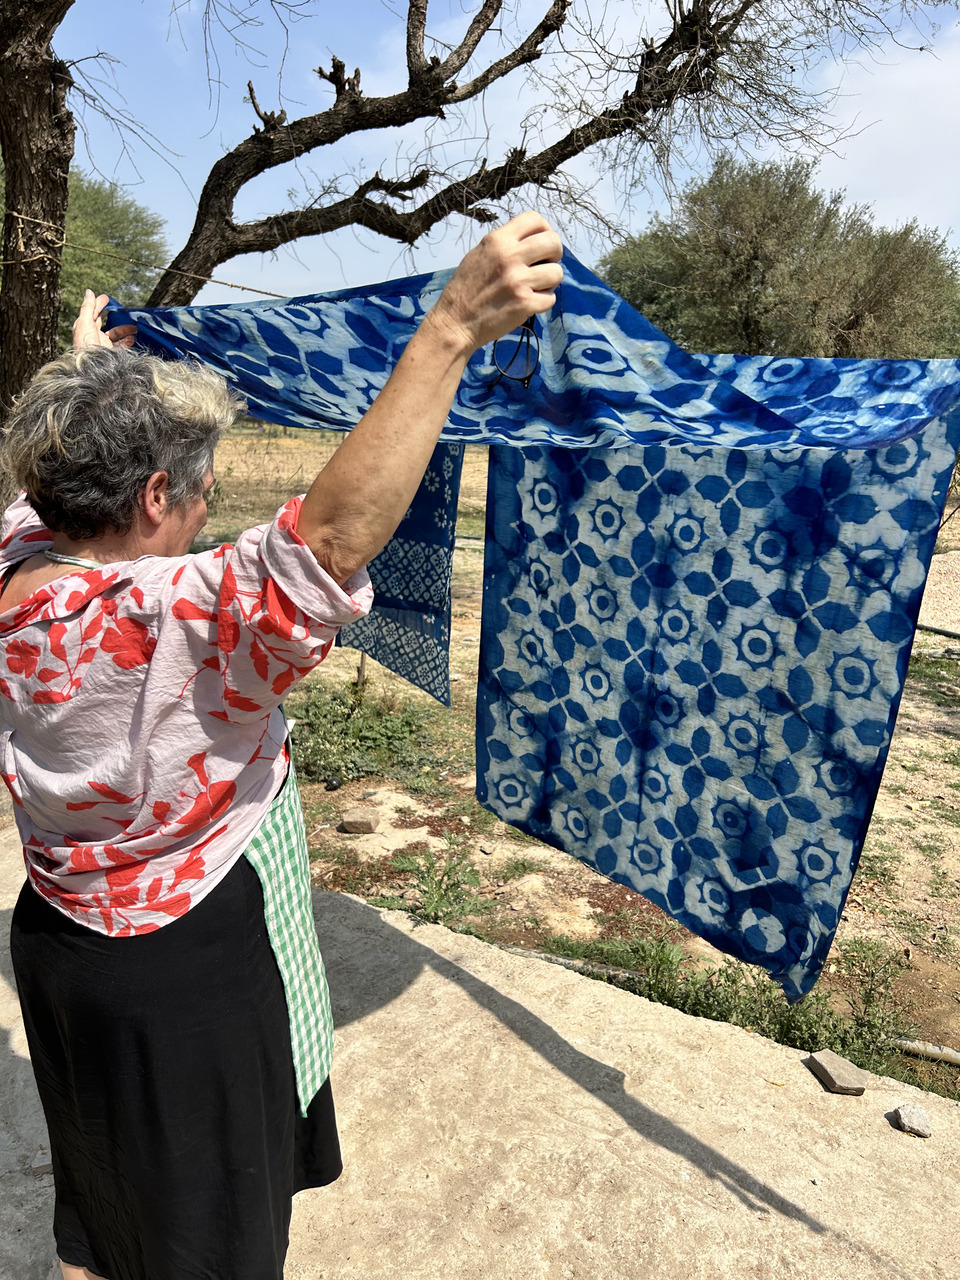 A women carefully observing the blue block printed mud resist dyed pattern drying in the outdoors.